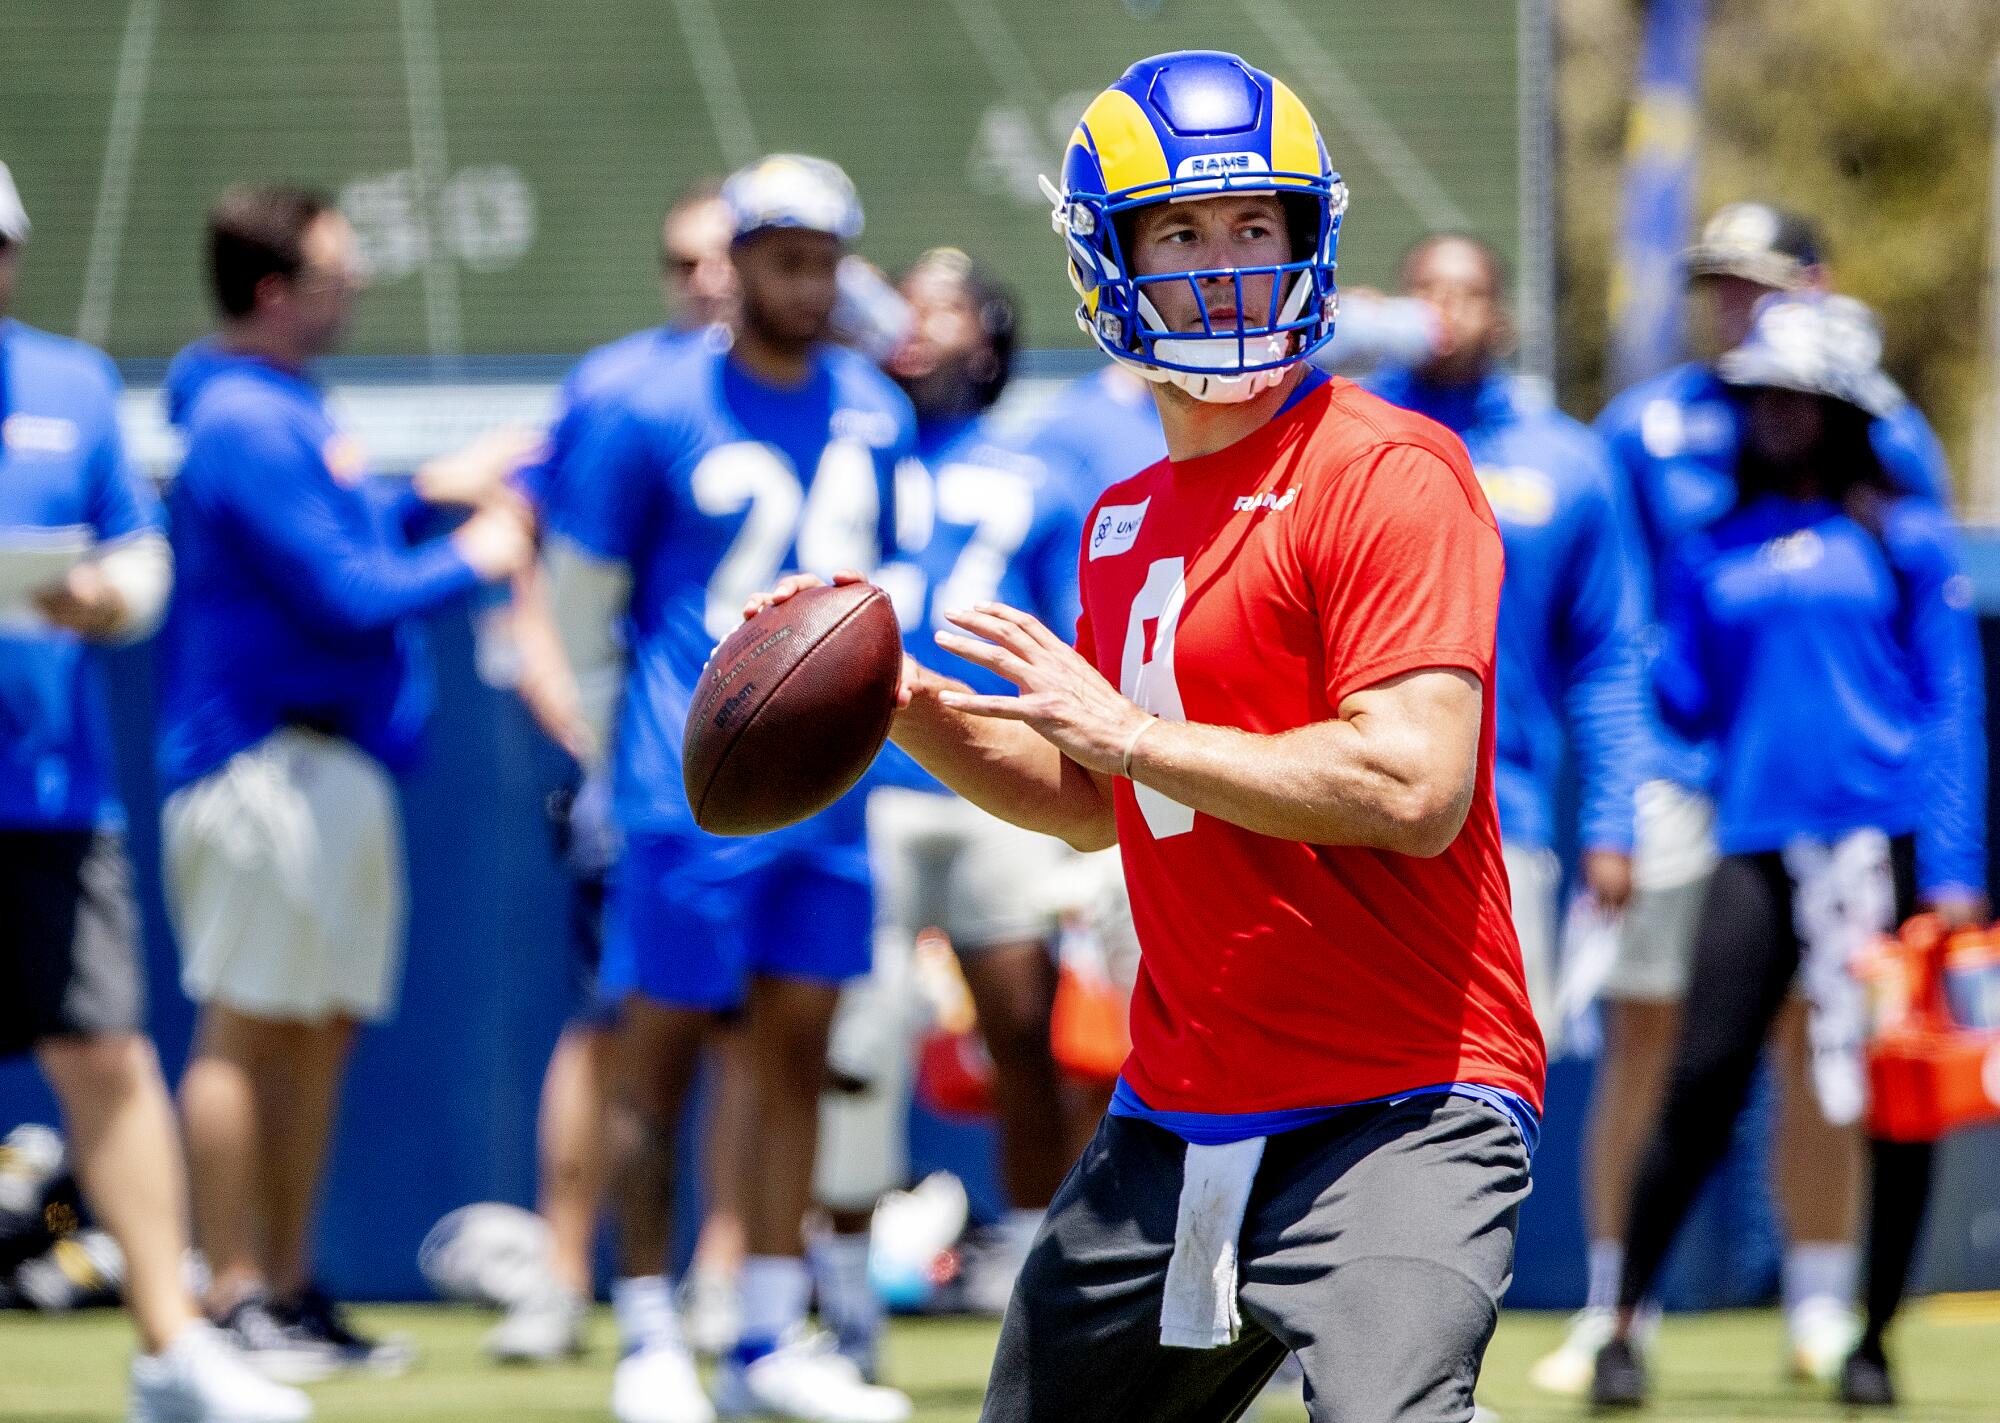 Rams quarterback Matthew Stafford looks to pass during training camp in July.